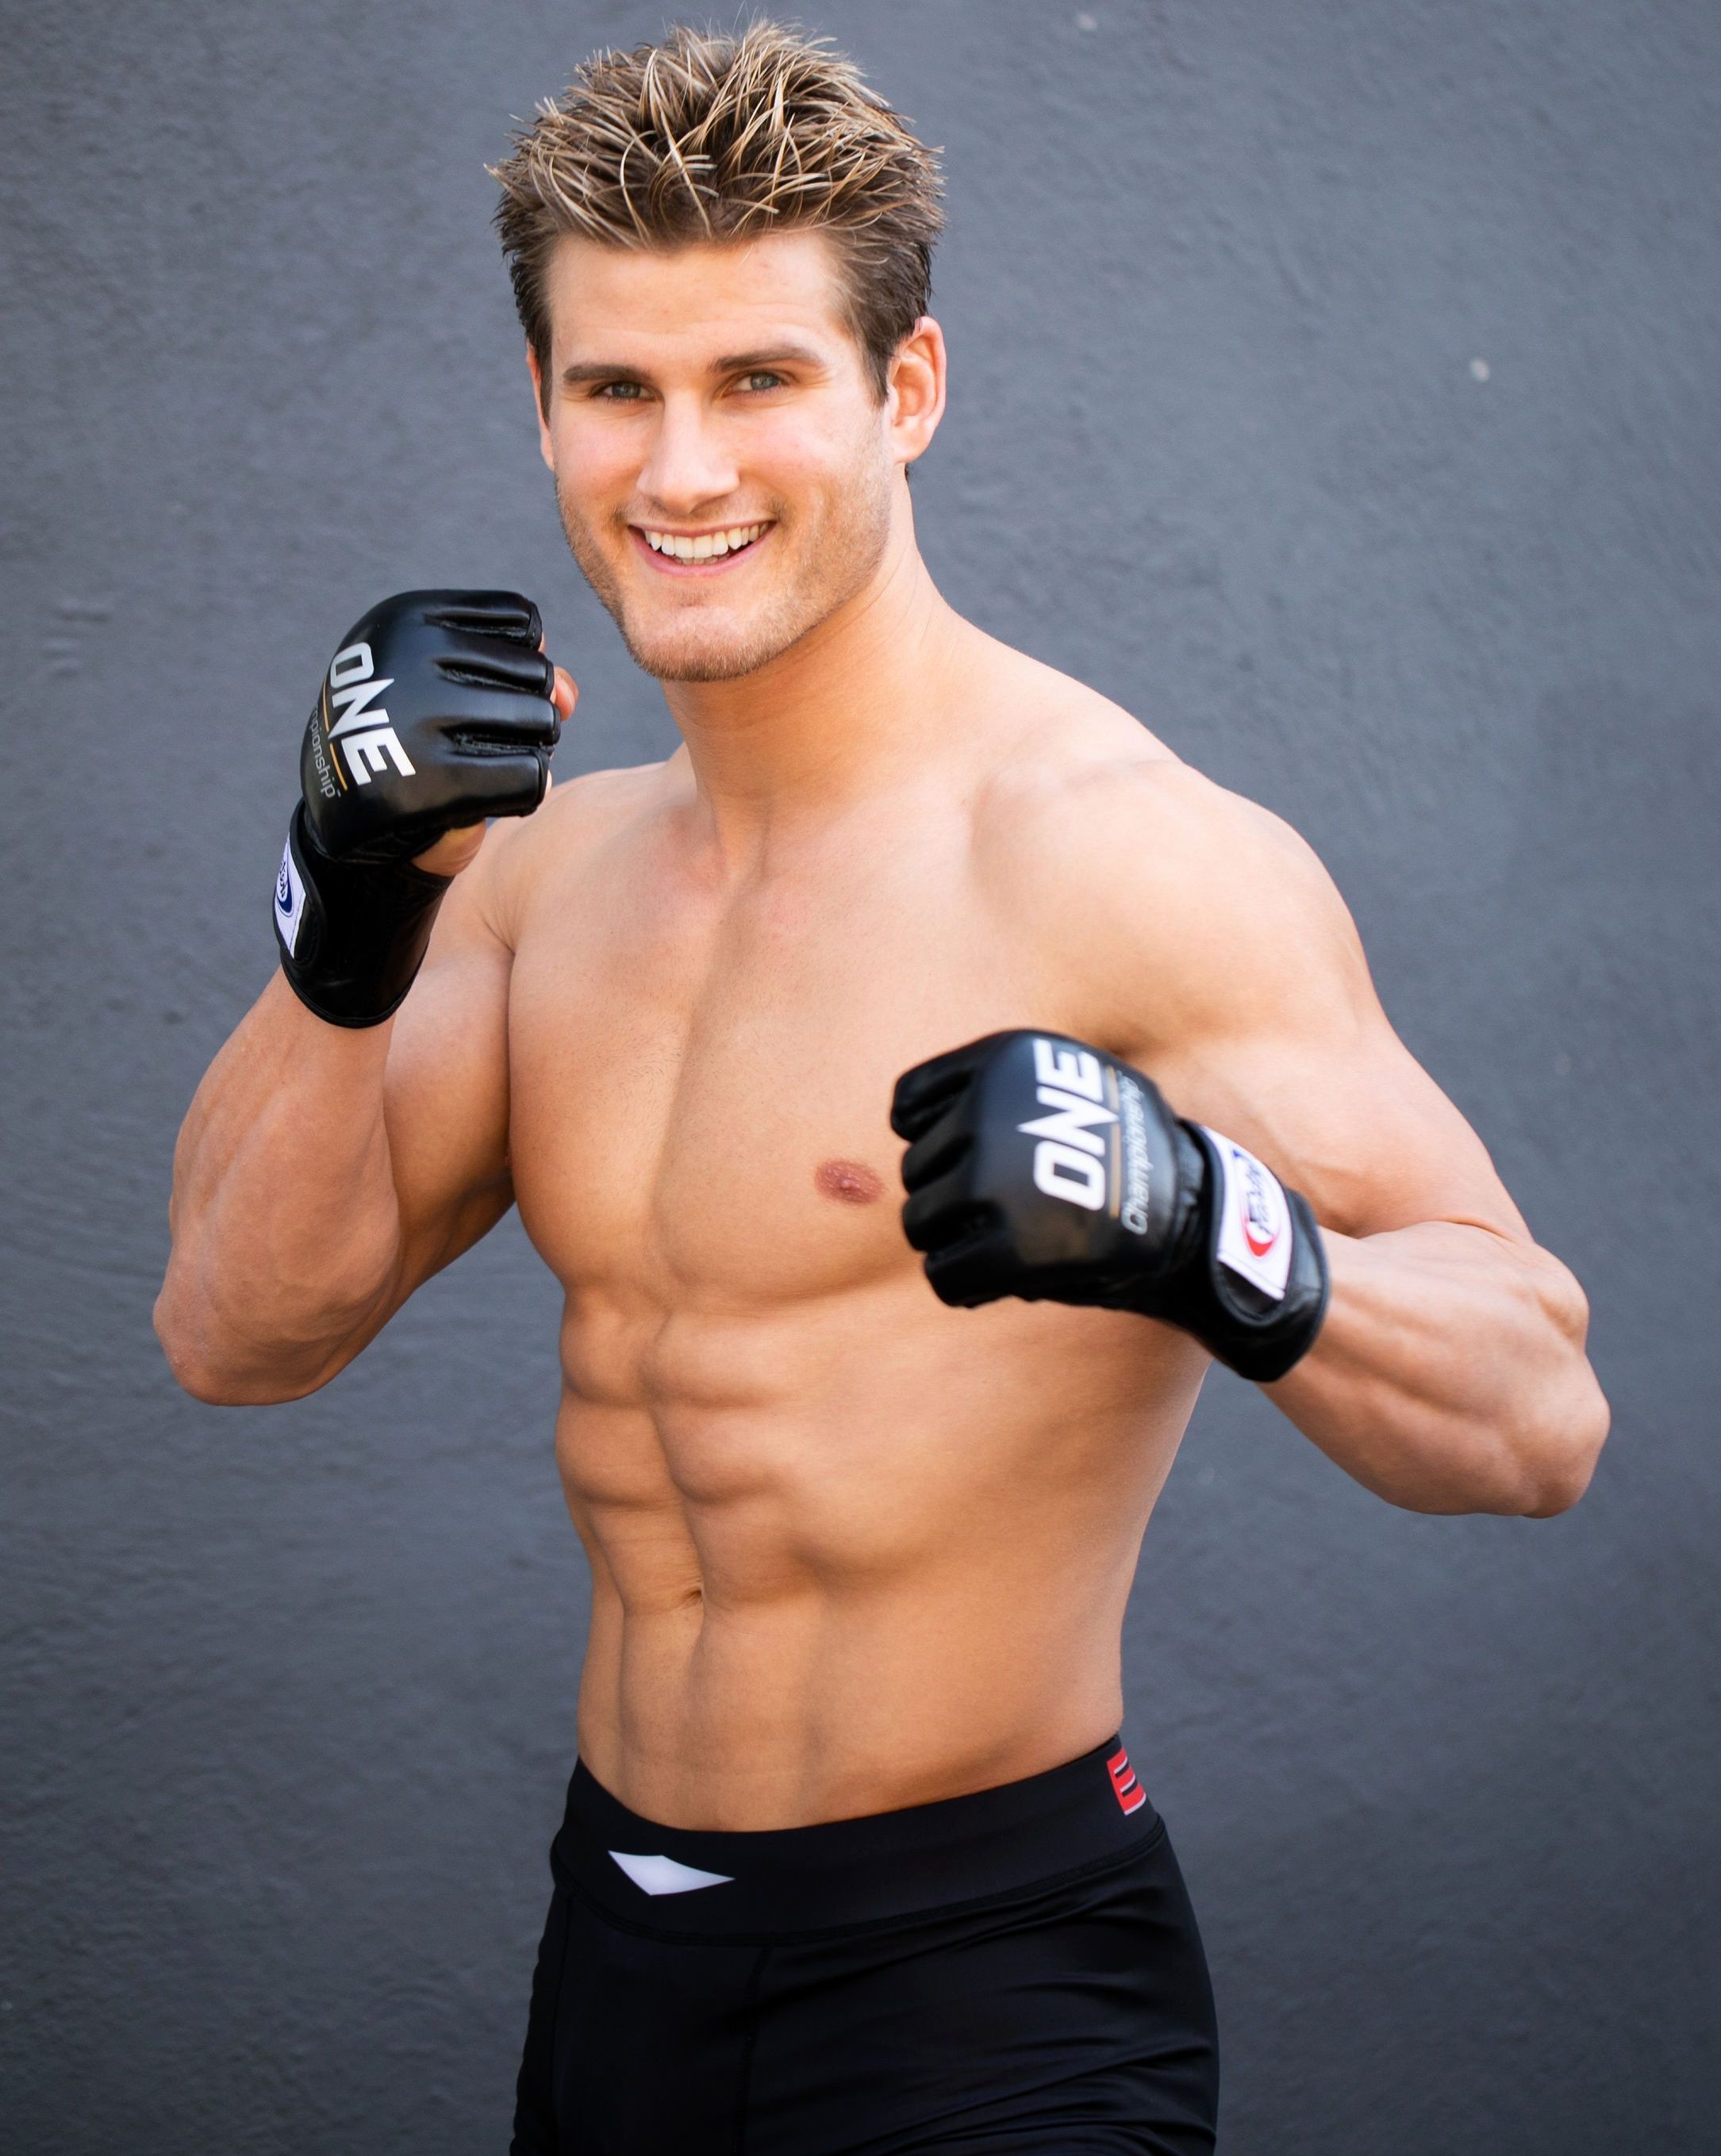 ONE Championship ace Sage Northcutt left Hollywood behind for a shot at wor...